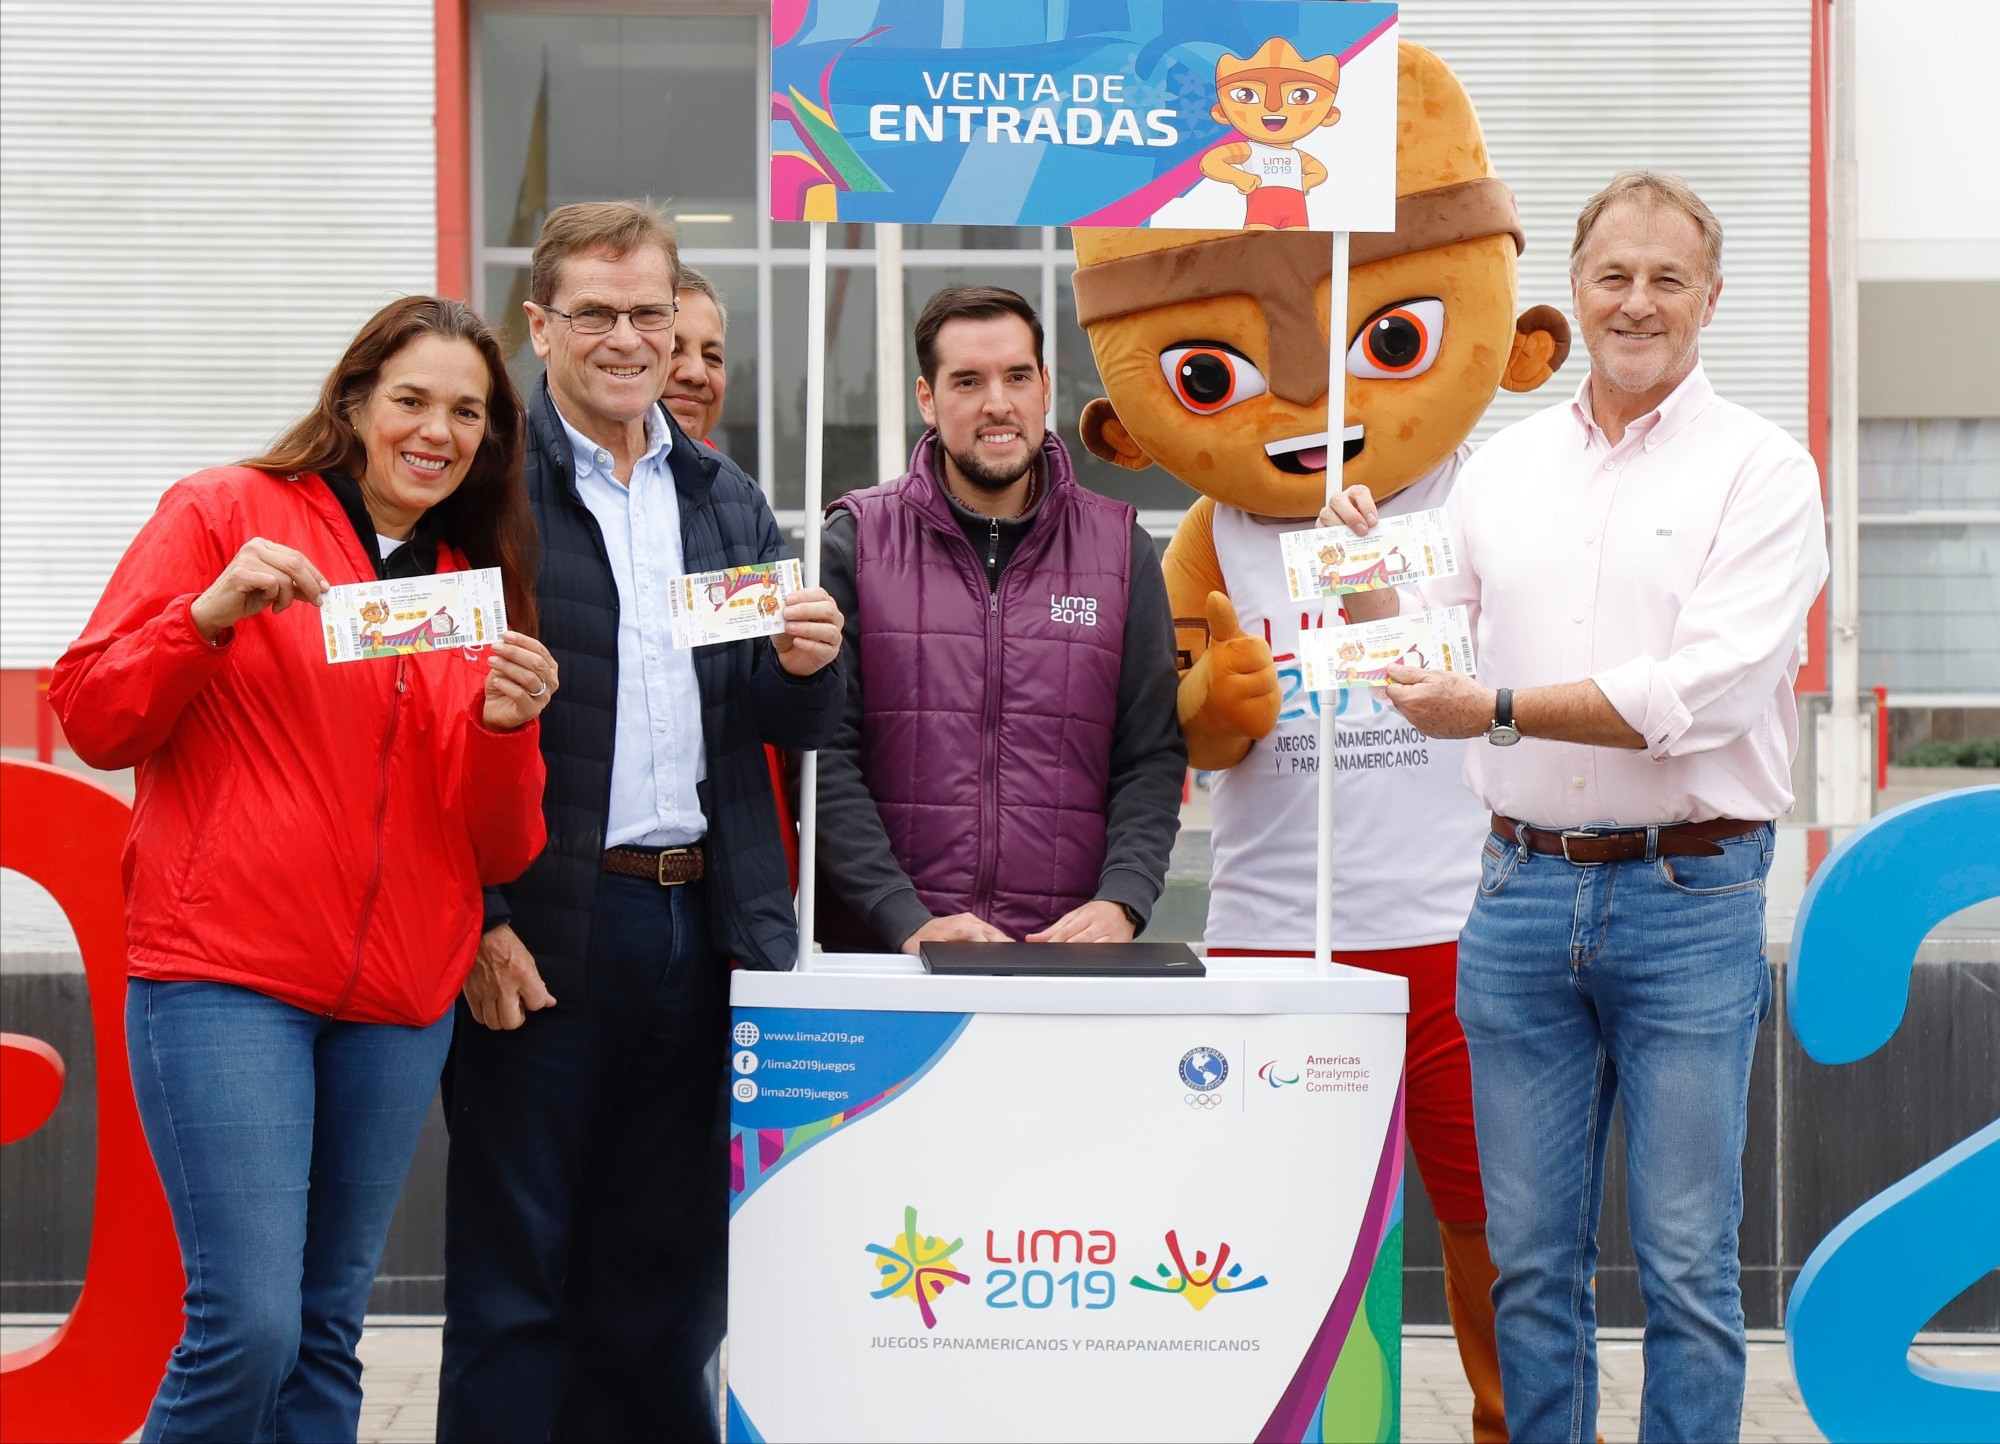 Lima 2019 tickets for Parapan American Games go on sale